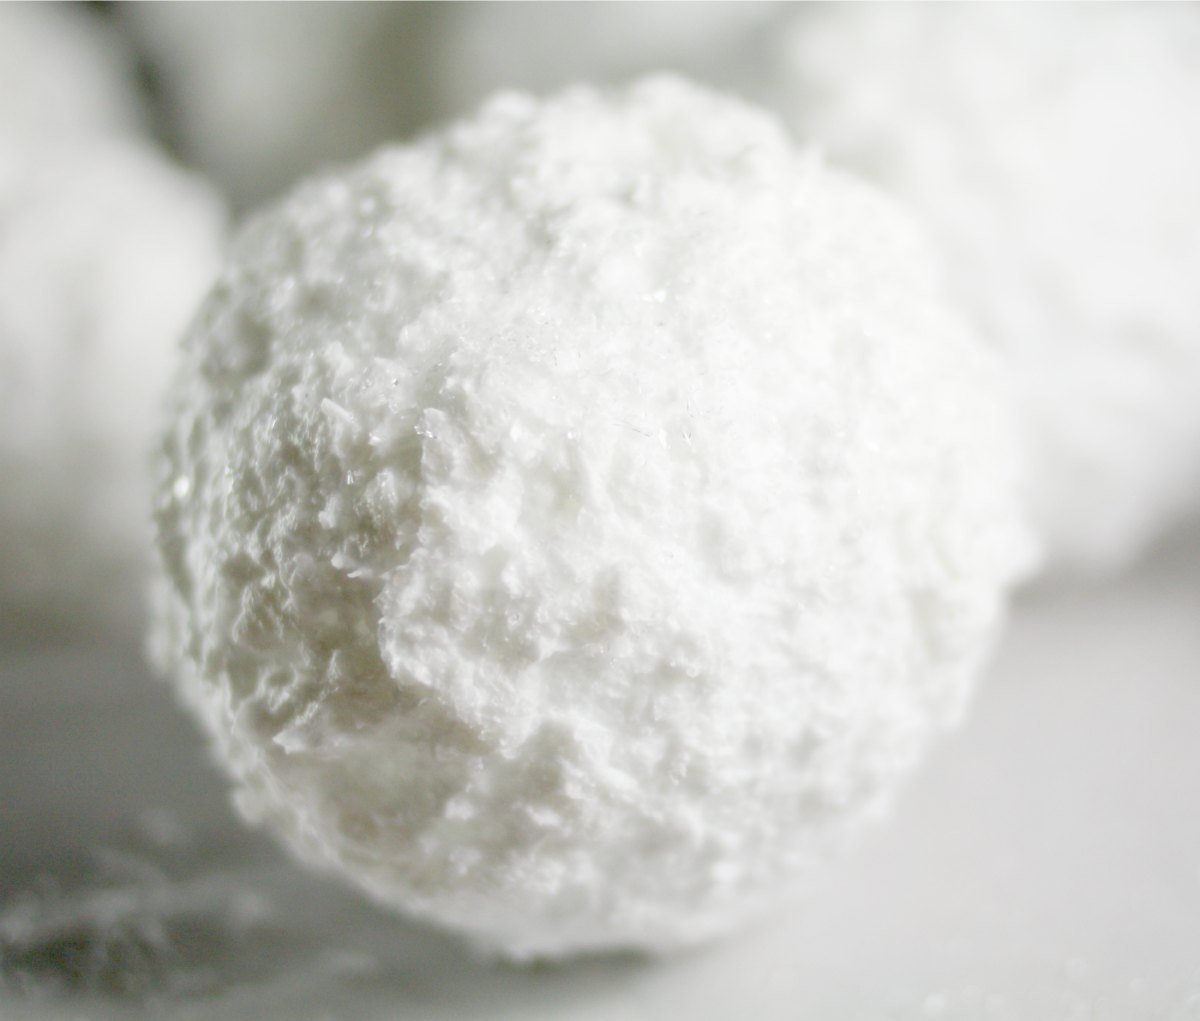 Faux snowball made from ivory soap